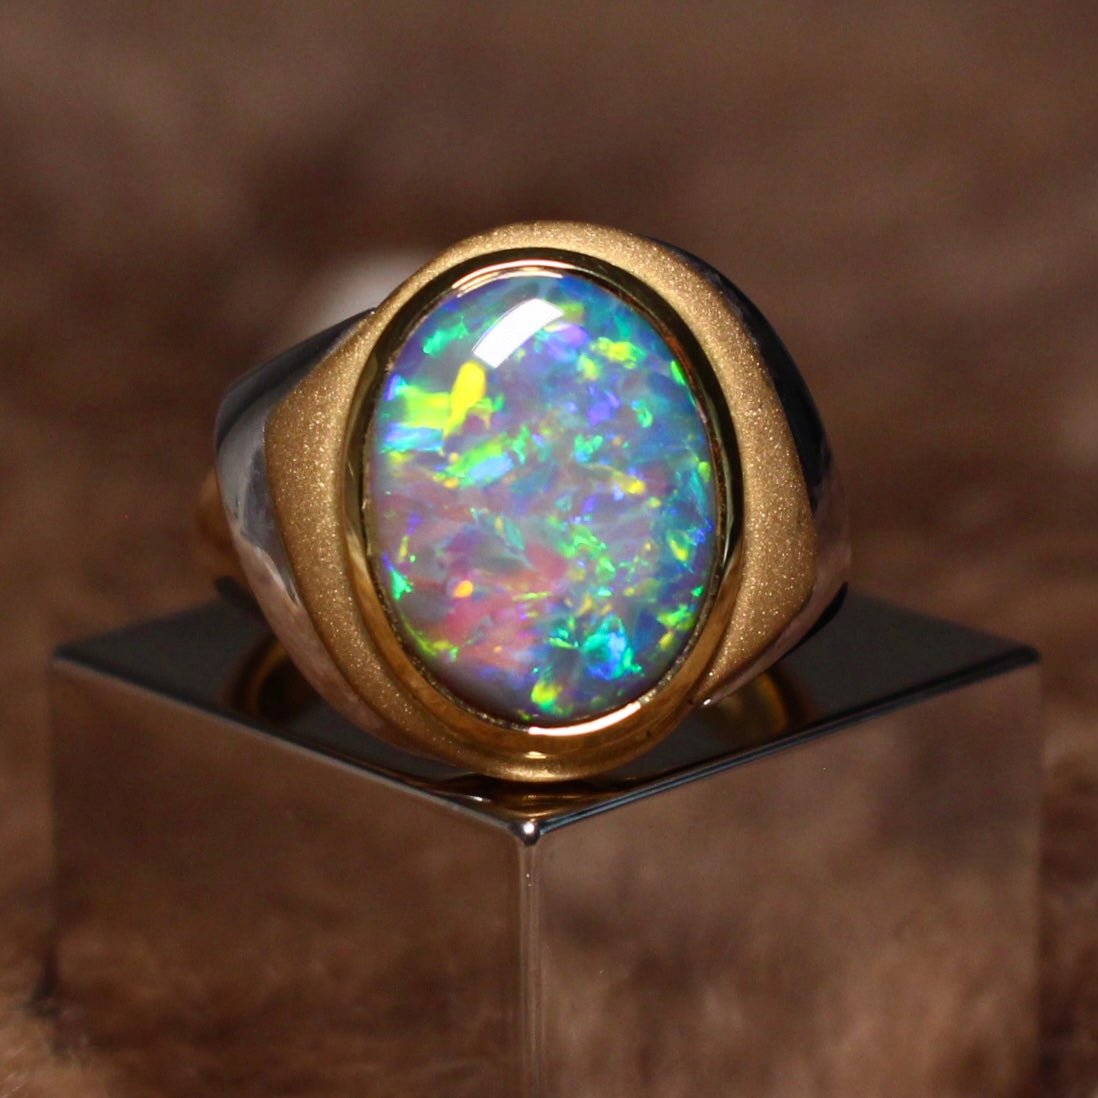 Crystal opal and diamond 14ky gold ring — Vintage Jewelers & Gifts, LLC.